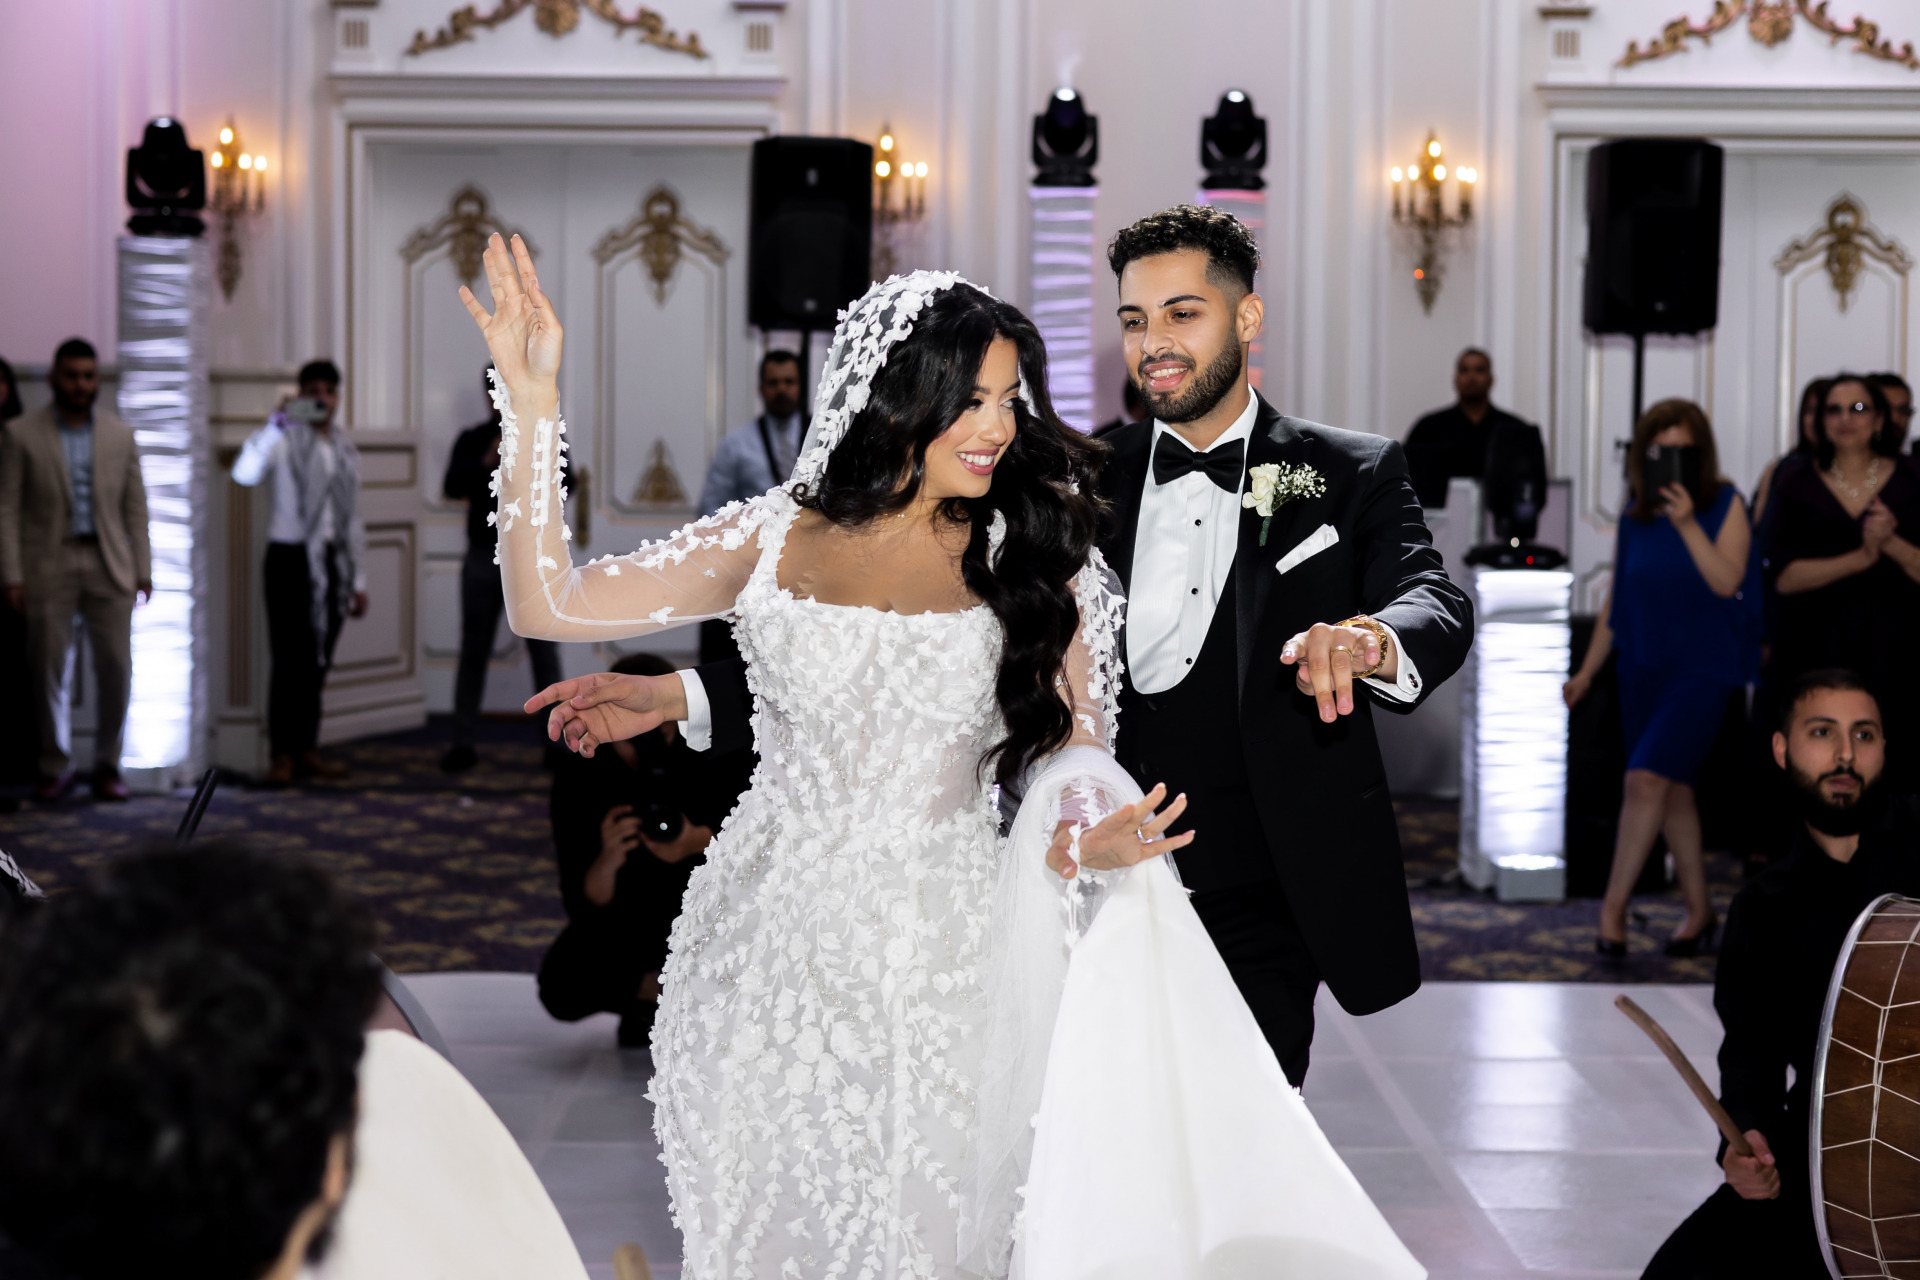 Egyprian coptic wedding editorial style in New Jersey 81